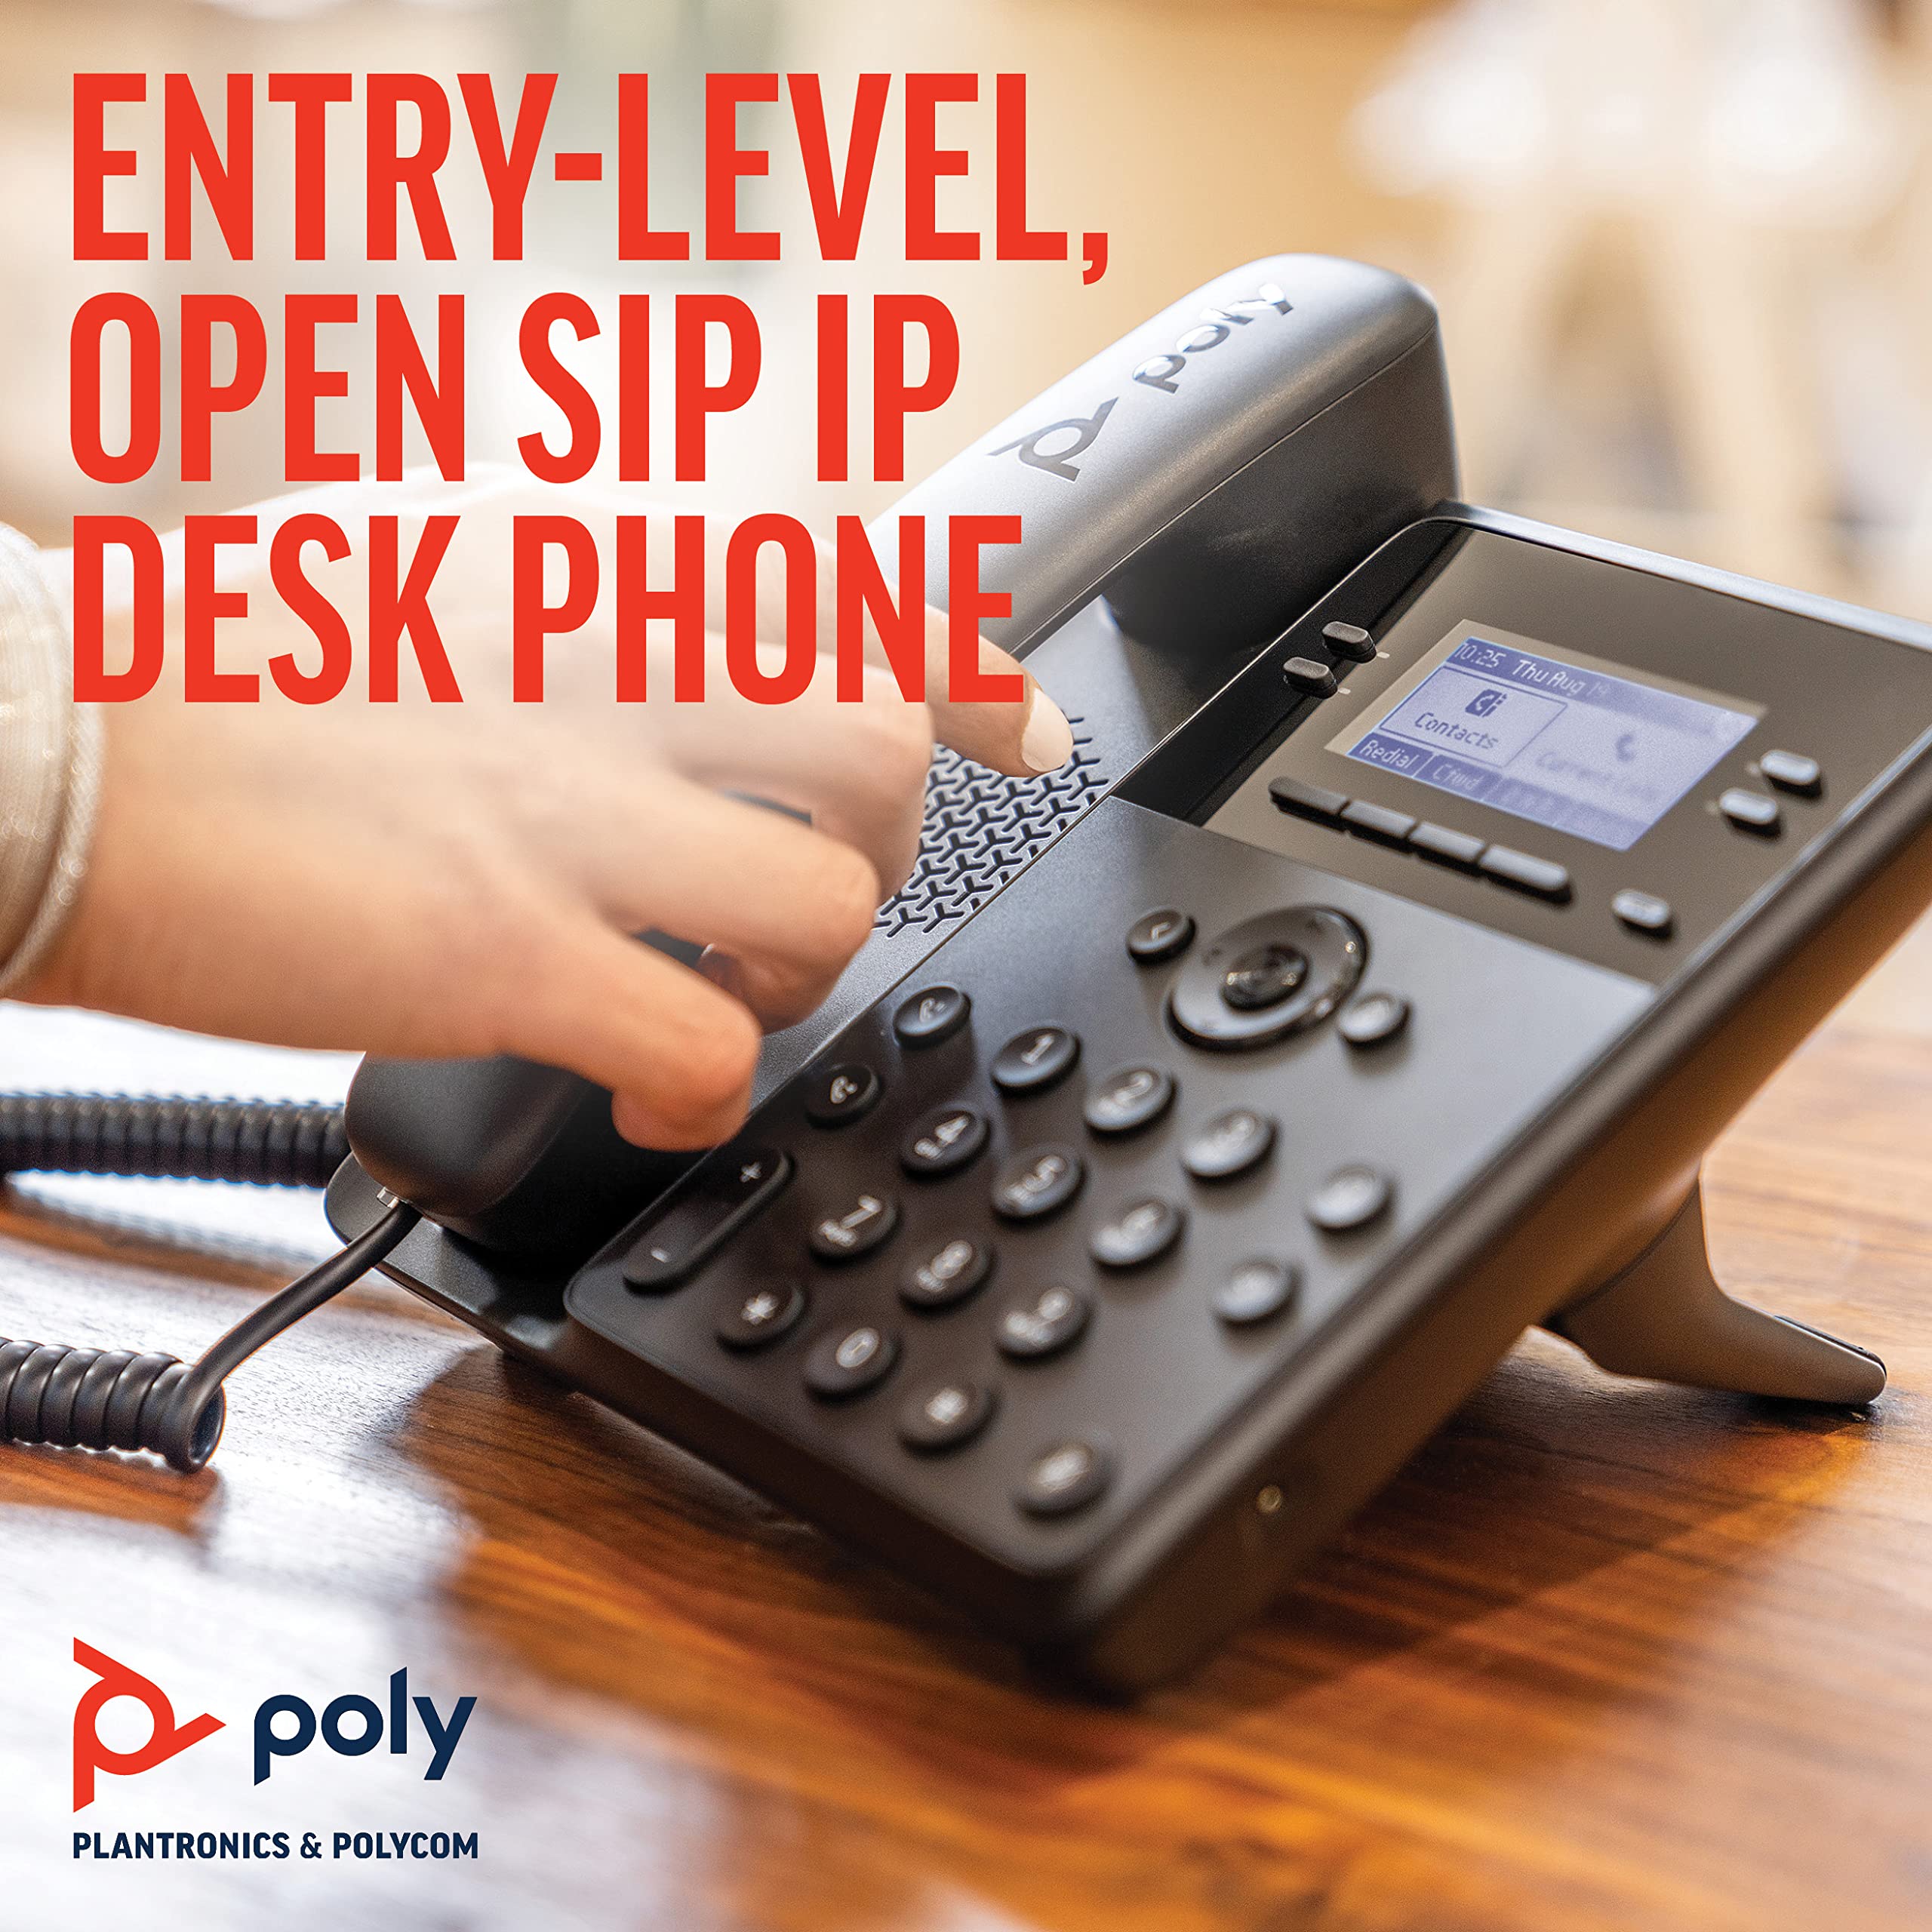 Poly Edge B30 IP Desk Phone, PoE (Polycom) - Open SIP - Connect to 16 Lines - Power Over Ethernet - Acoustic Fence Technology - RJ9 and 3.5mm Headset Ports - Illuminated Keys Where You Need Them